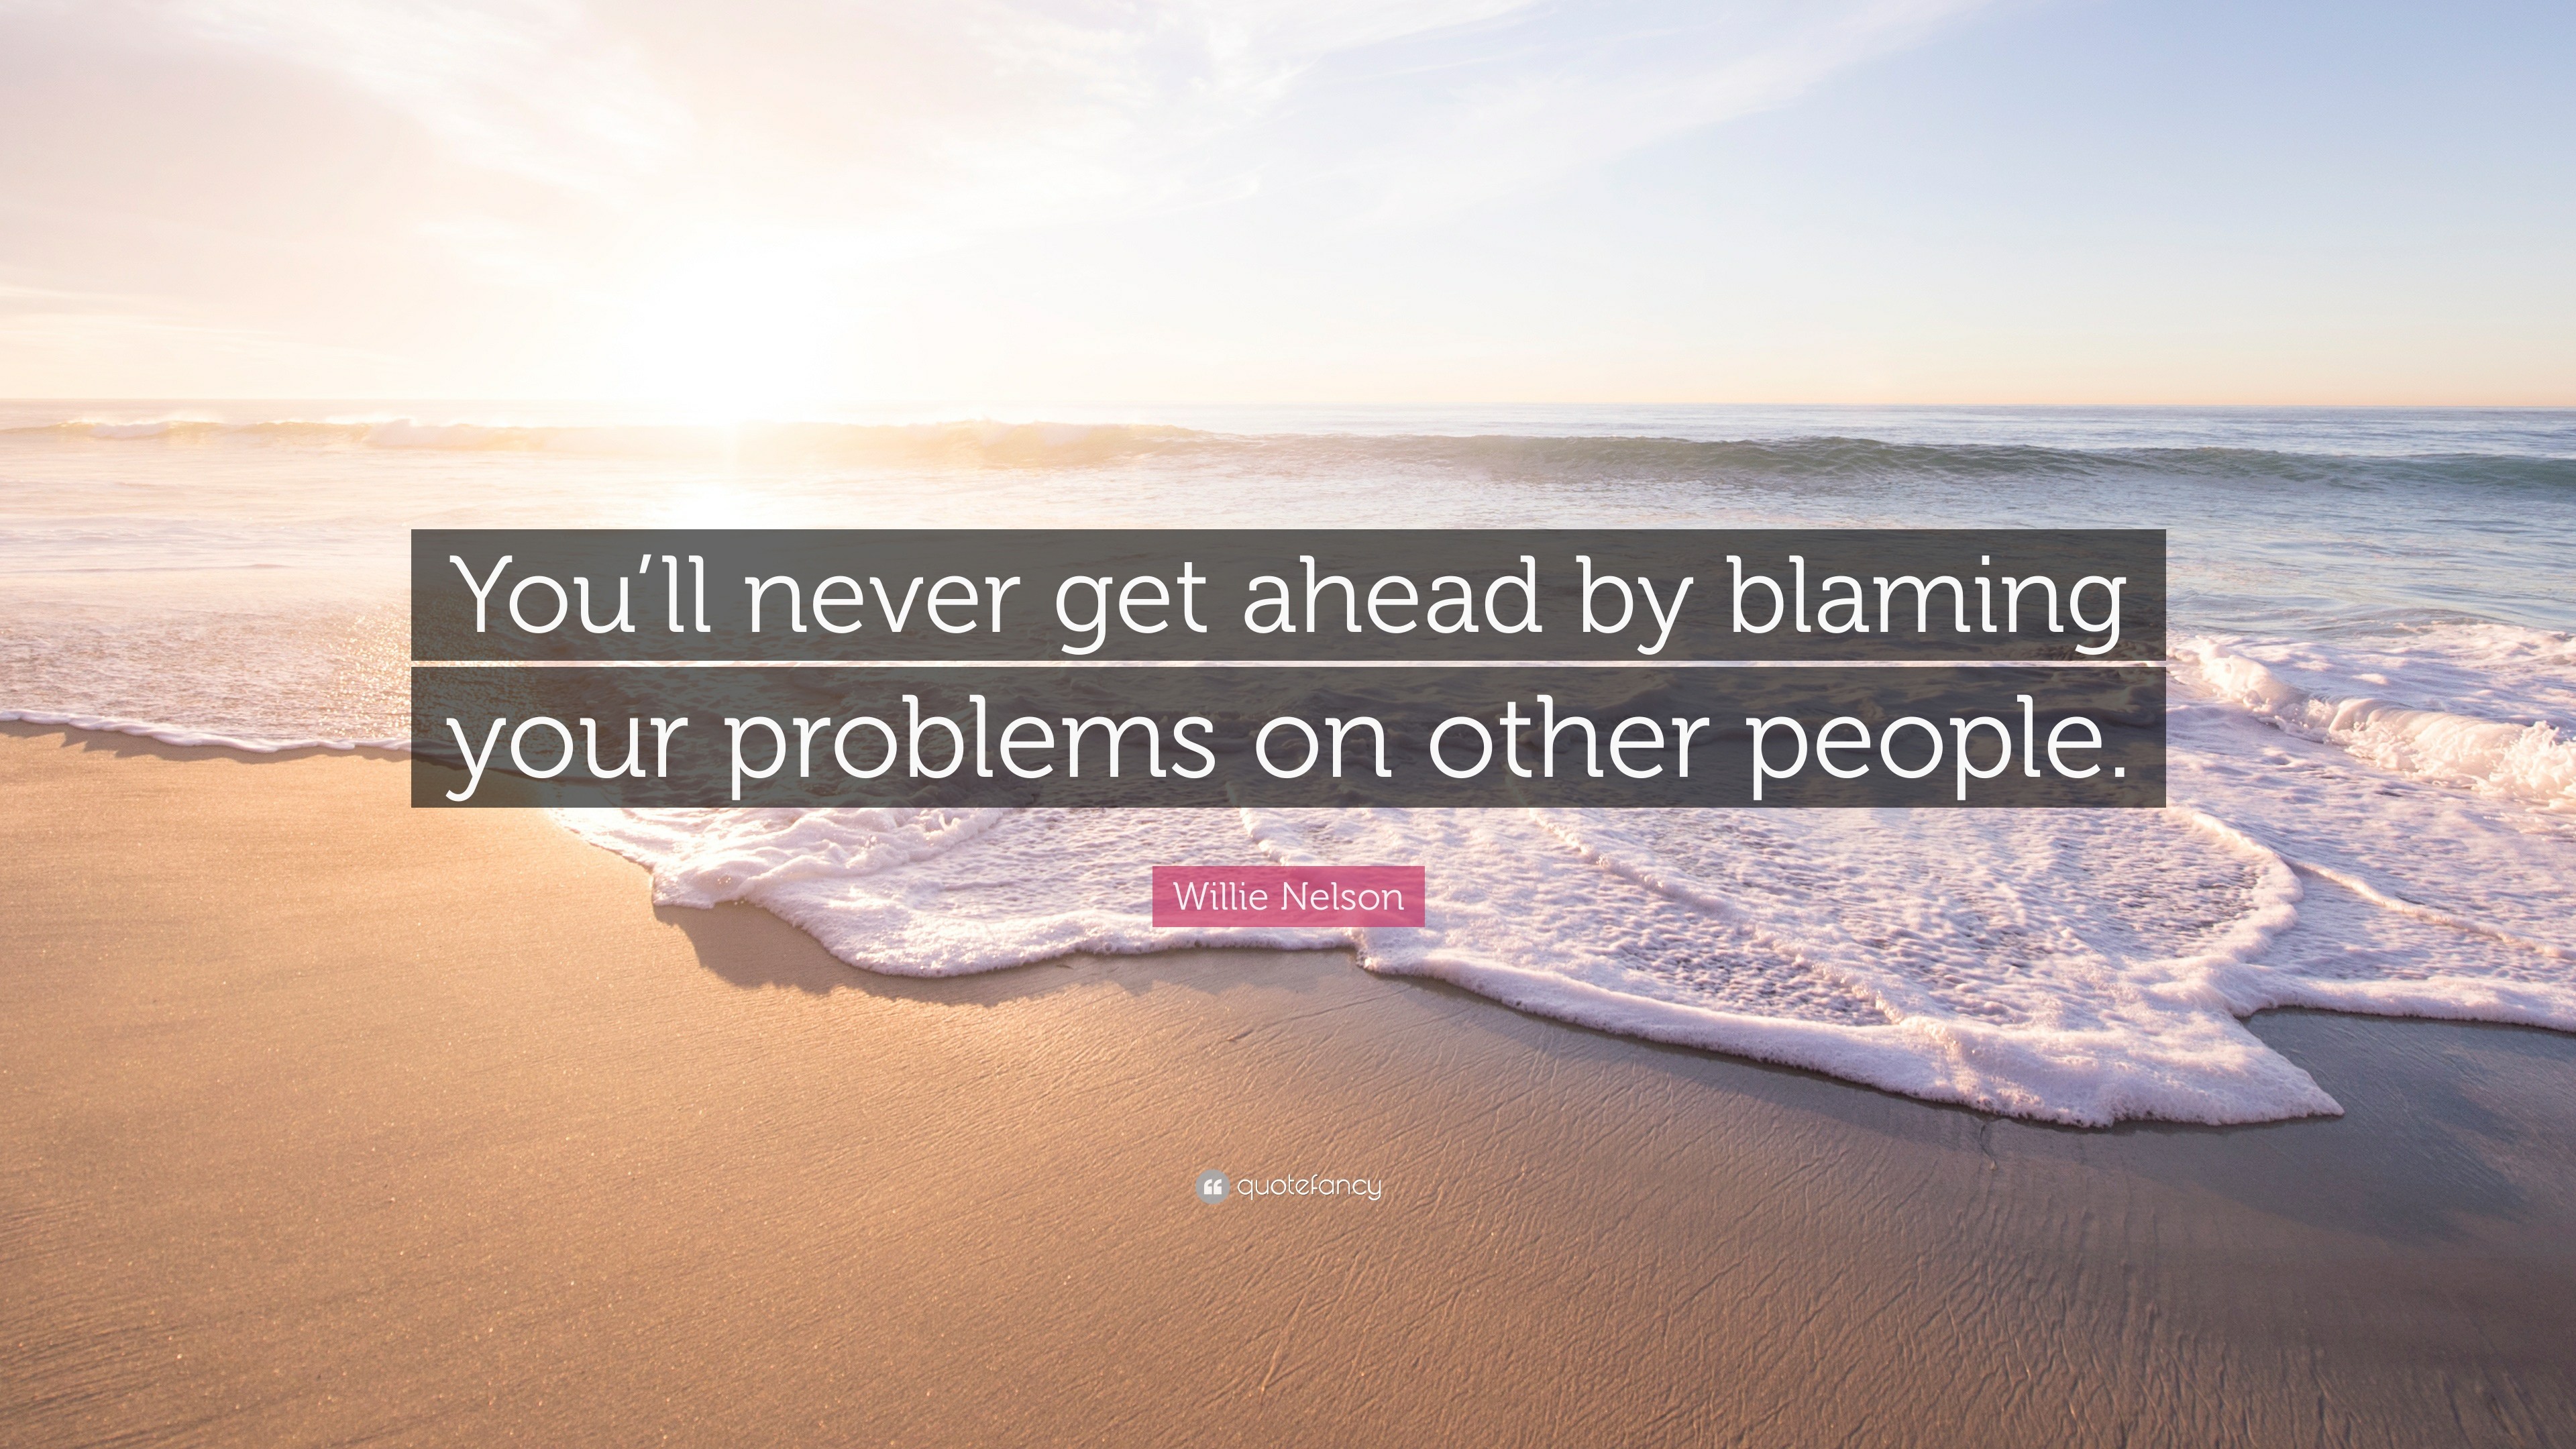 3840x2160 Willie Nelson Quote: “You'll never get ahead by blaming your problems on